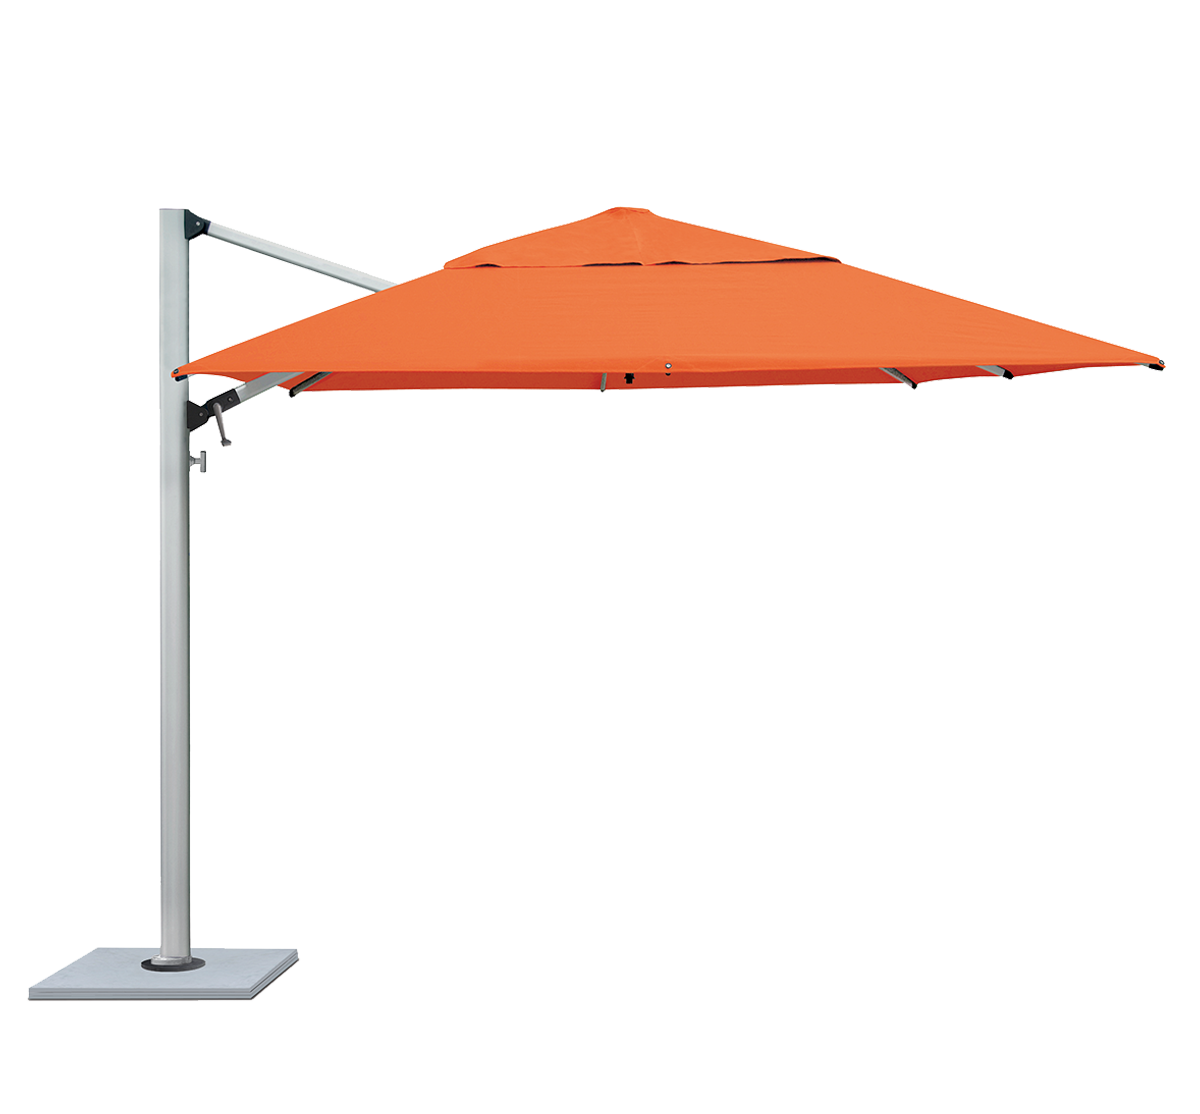 The Polaris impresses in both form and function. This designer sidepost umbrella offers an effortless crank and infinite tilt function to provide shade coverage at any time of the day. Sophisticated styling and superb construction make the Polaris one of our most popular models.